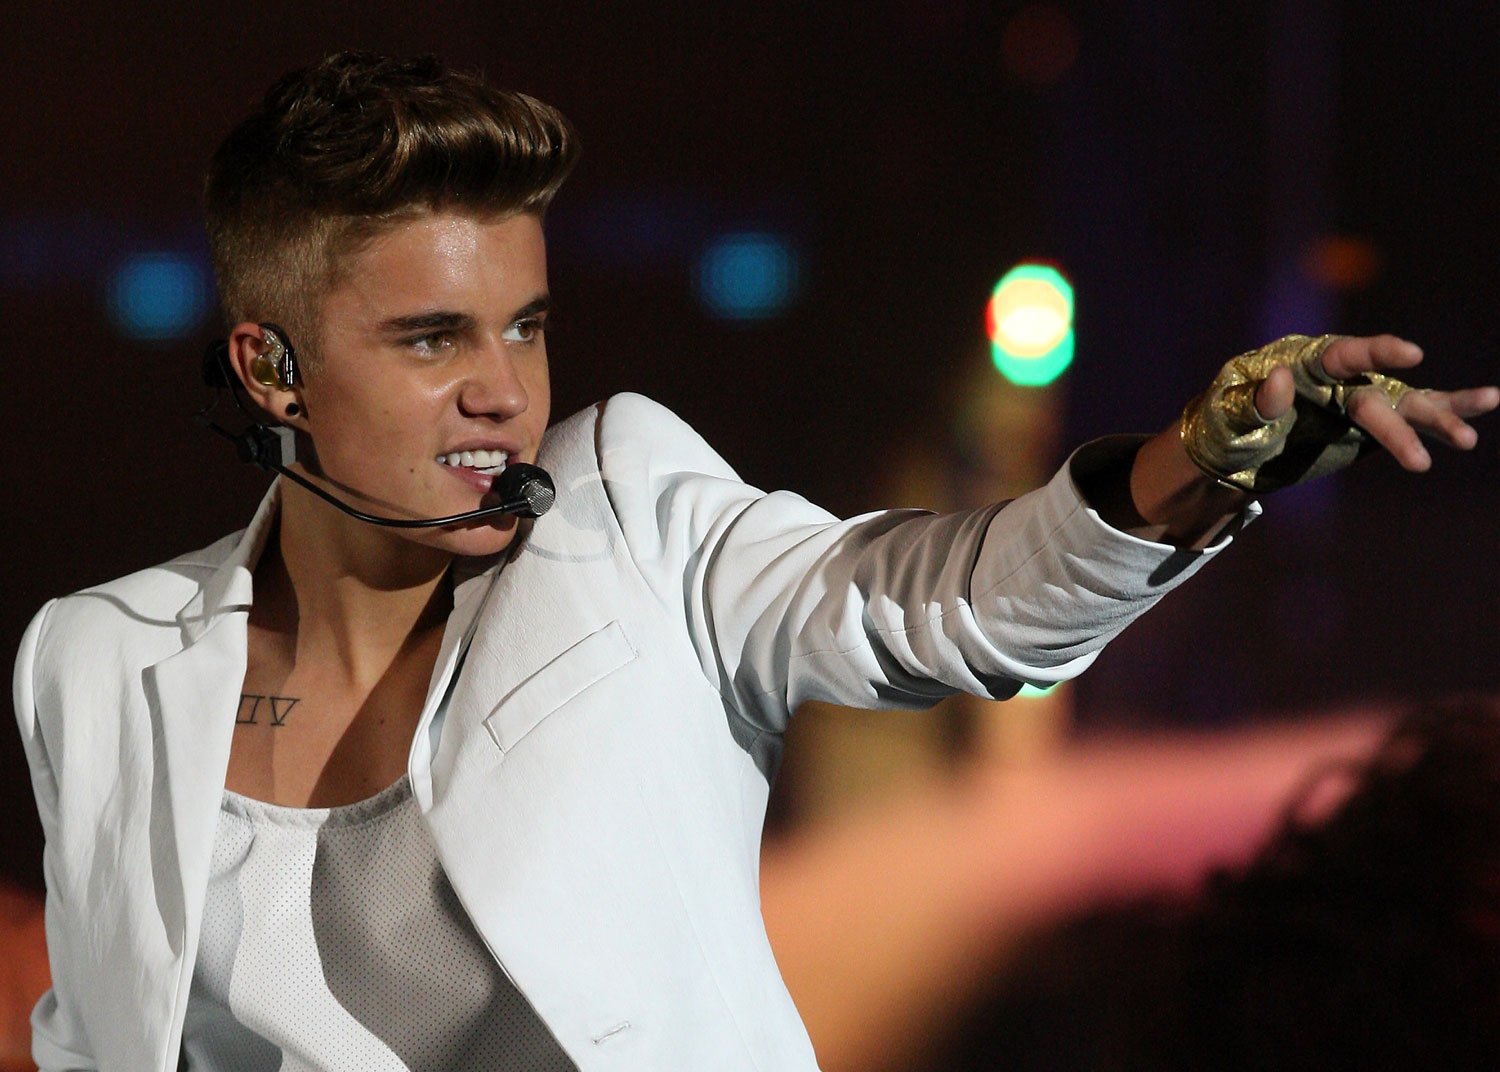 Justin Bieber performs at O2 World in Berlin, on March 31, 2013. (Adam Berry / Getty Images)